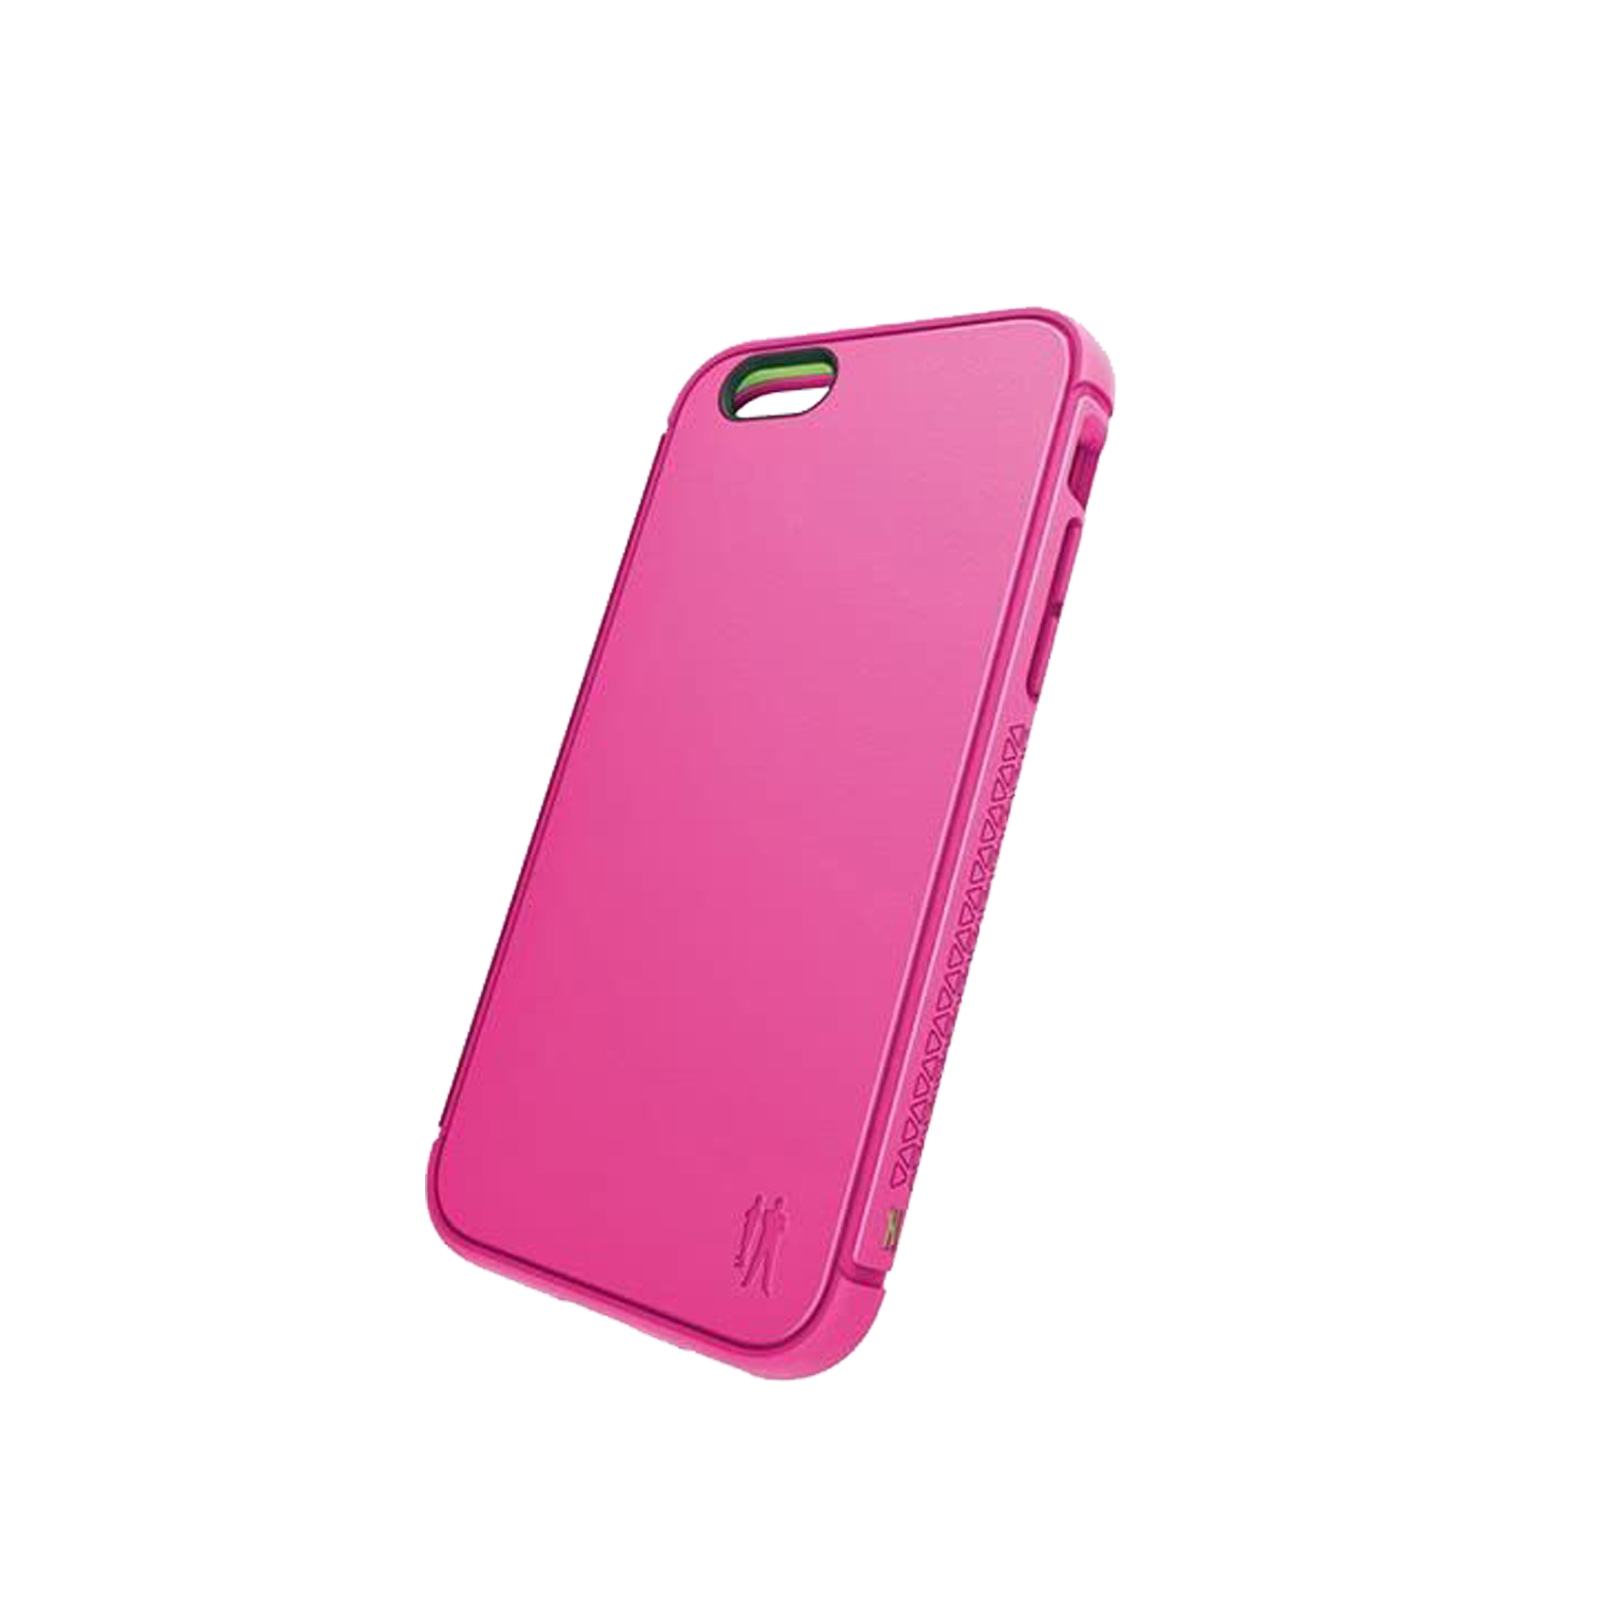 Contact iPhone 6 Plus / 7 Plus / 8 Plus Pink Case Brand New